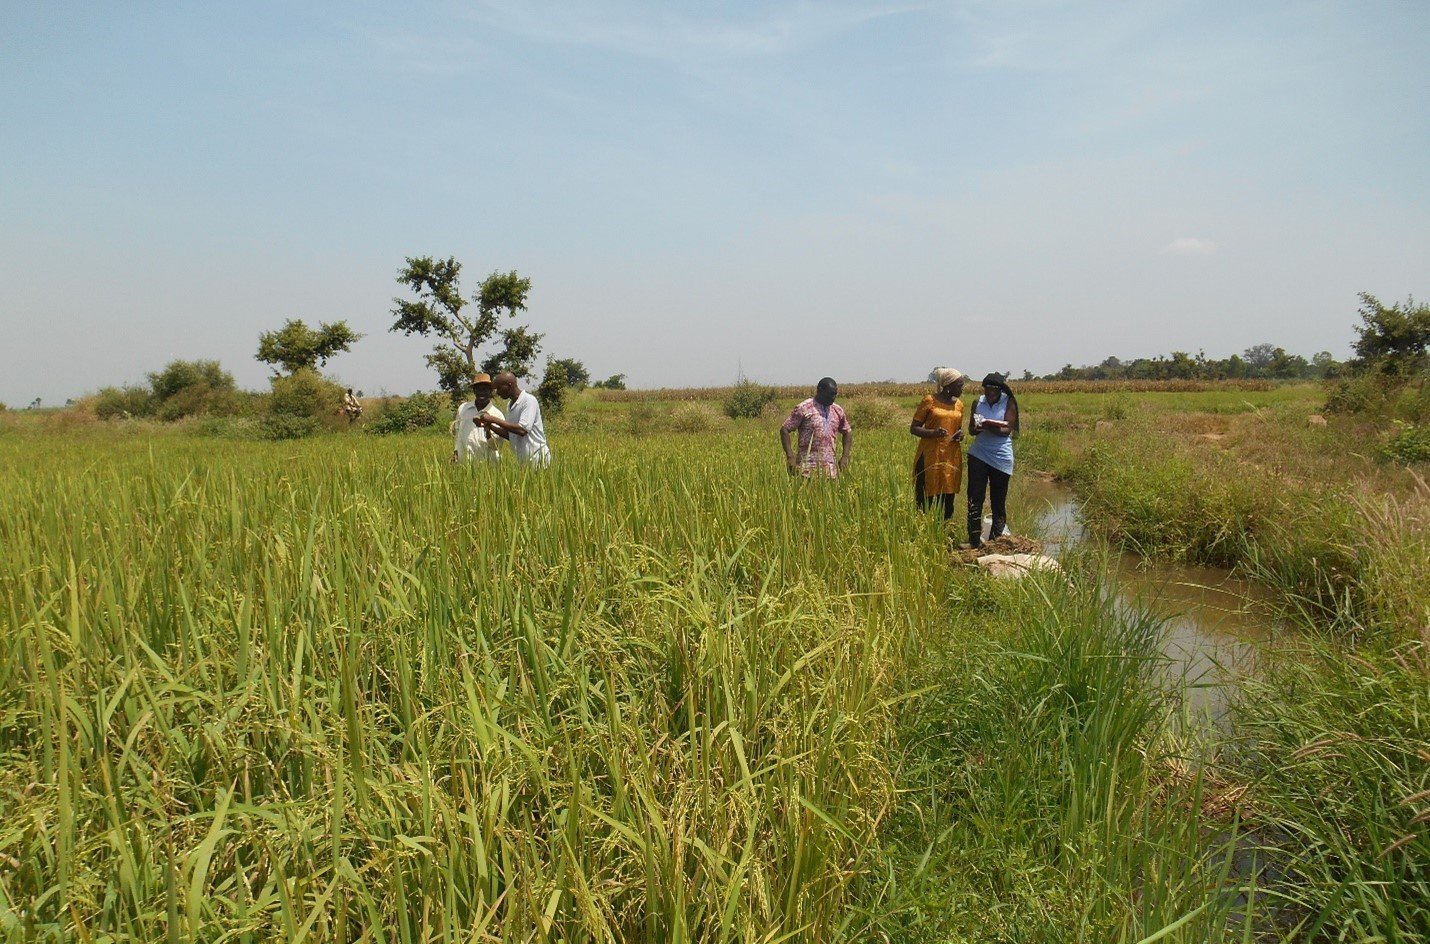 5-148_babana_Students (women) consulting a treated rice field